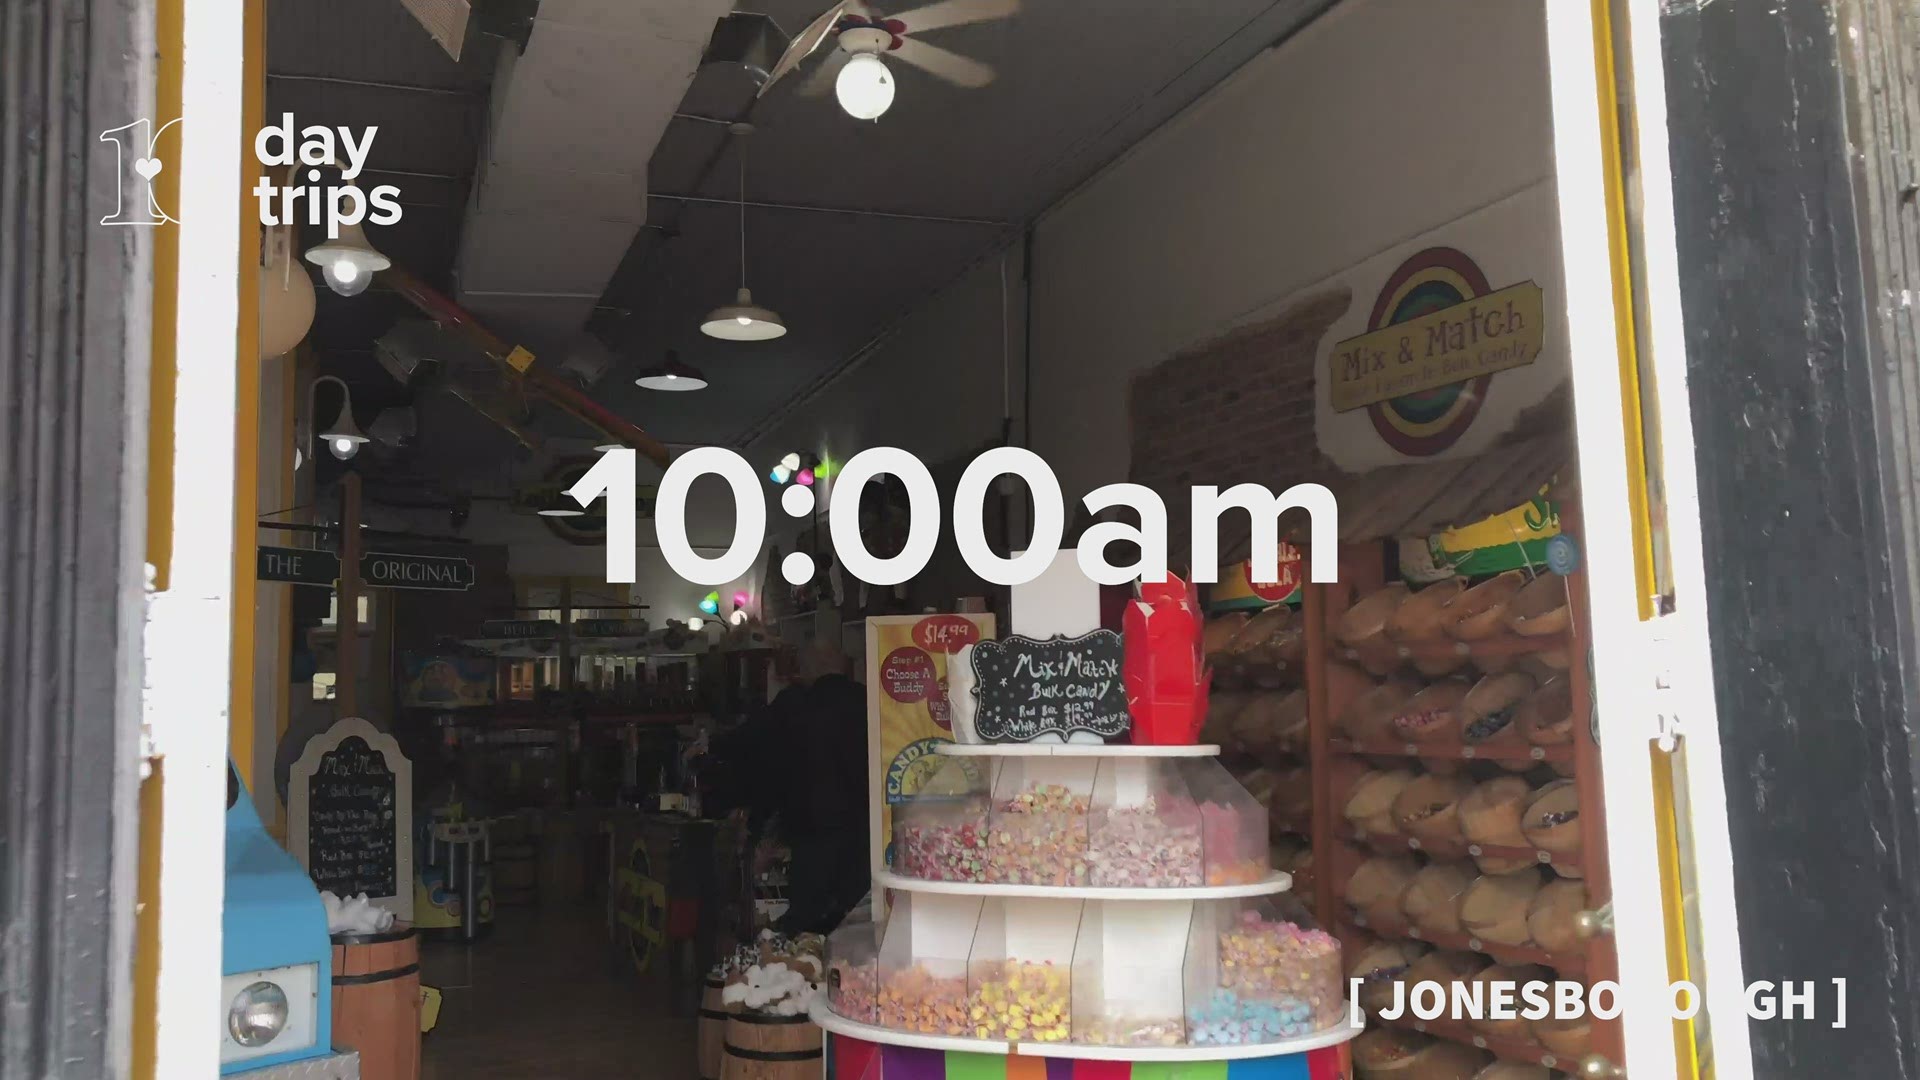 Indulge your sweet tooth early in the morning in this interactive candy and toy store.